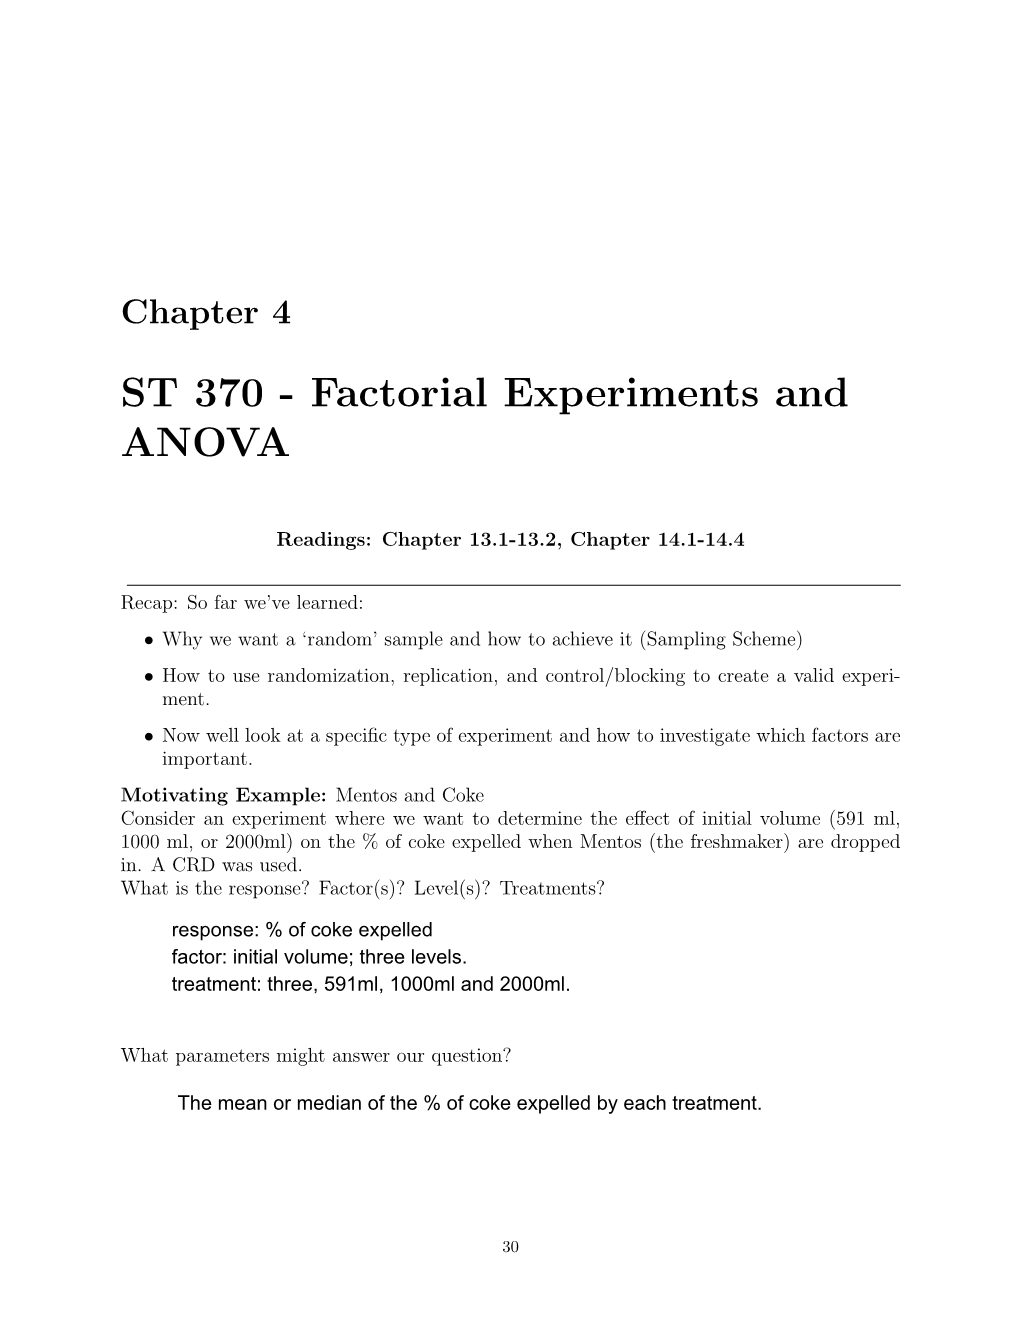 ST 370 - Factorial Experiments and ANOVA